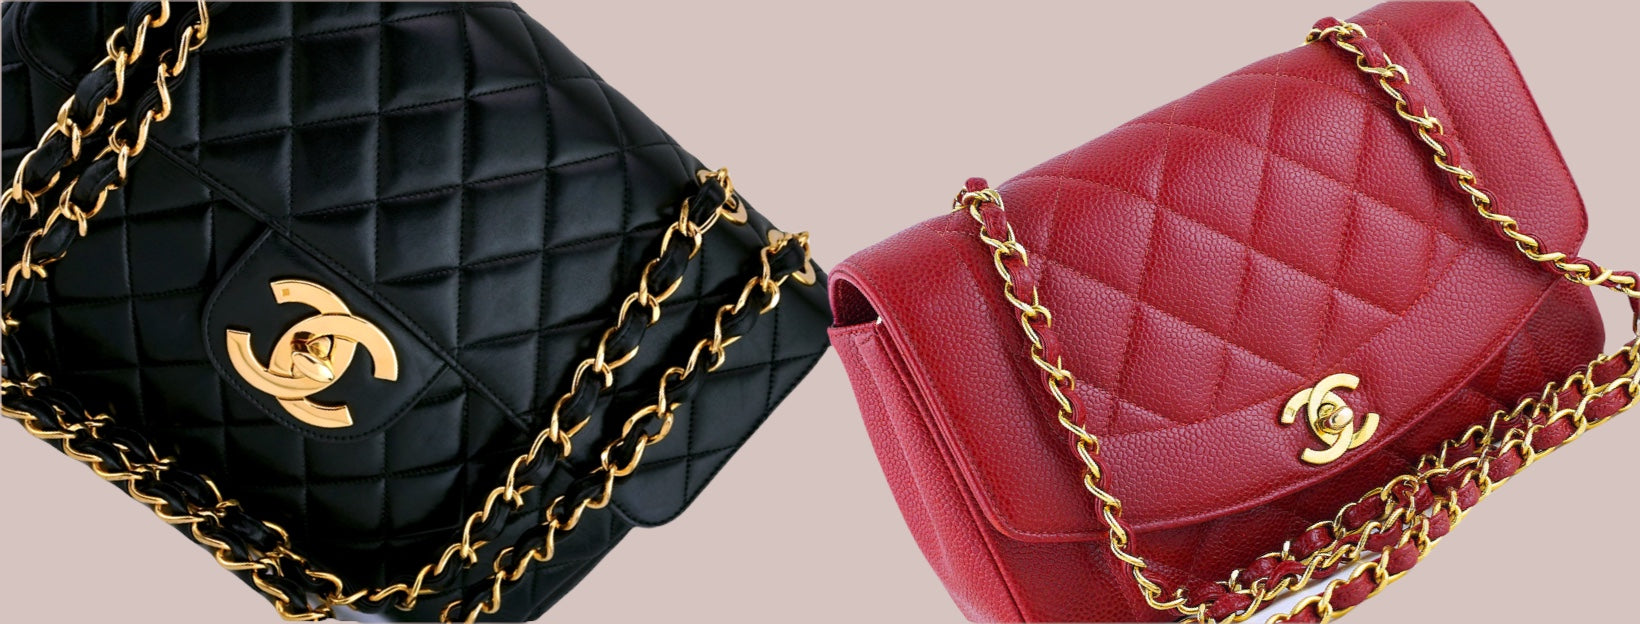 red chanel pouch clutch